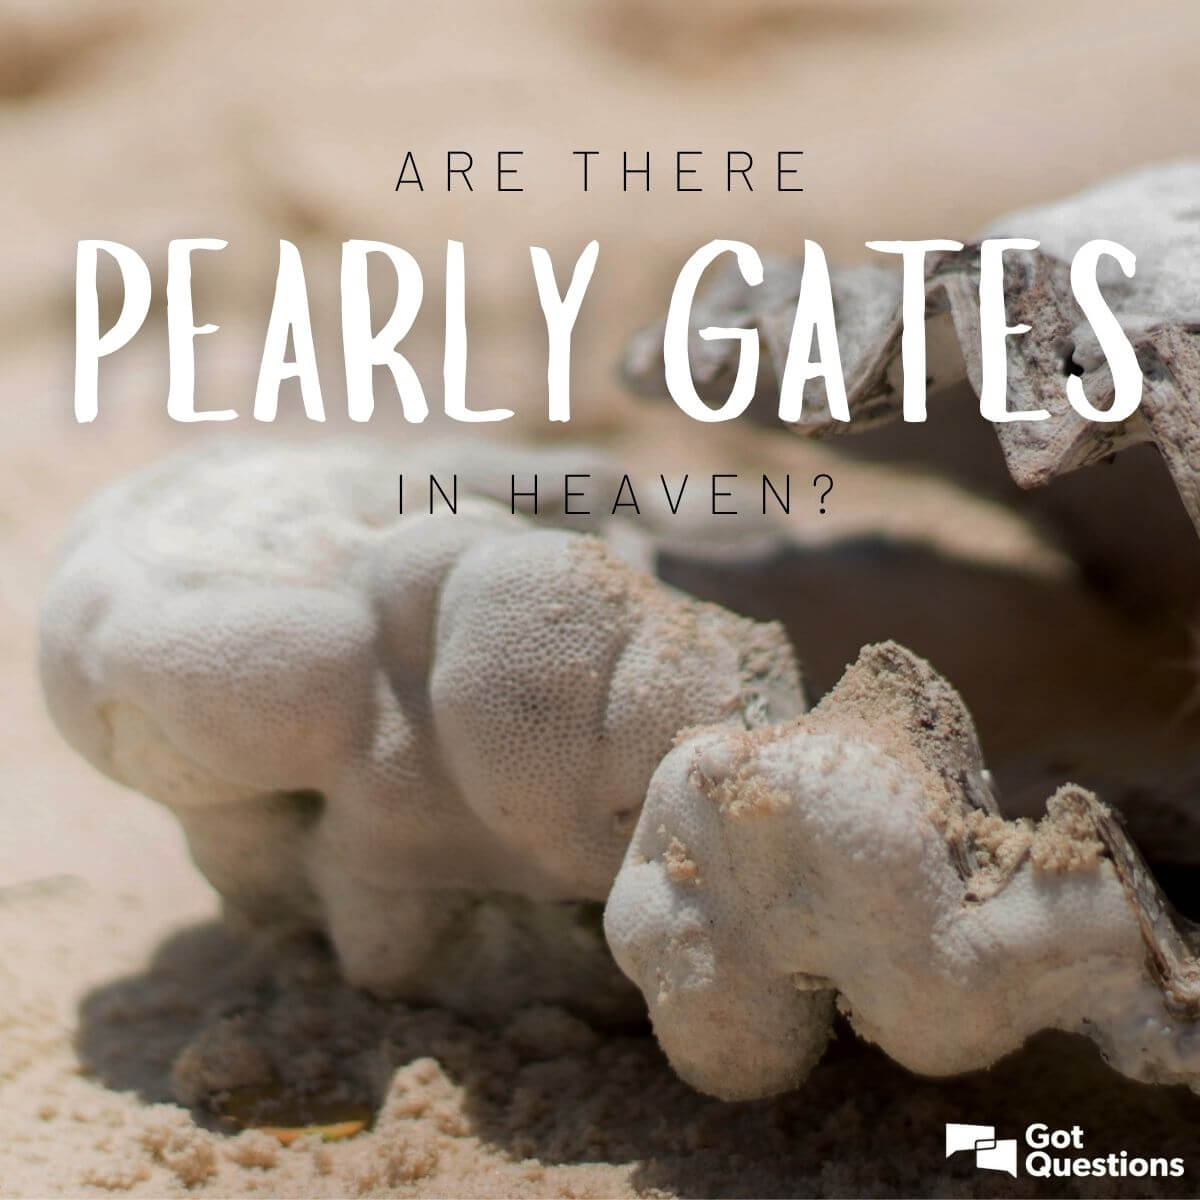 Are there pearly gates in heaven? | GotQuestions.org